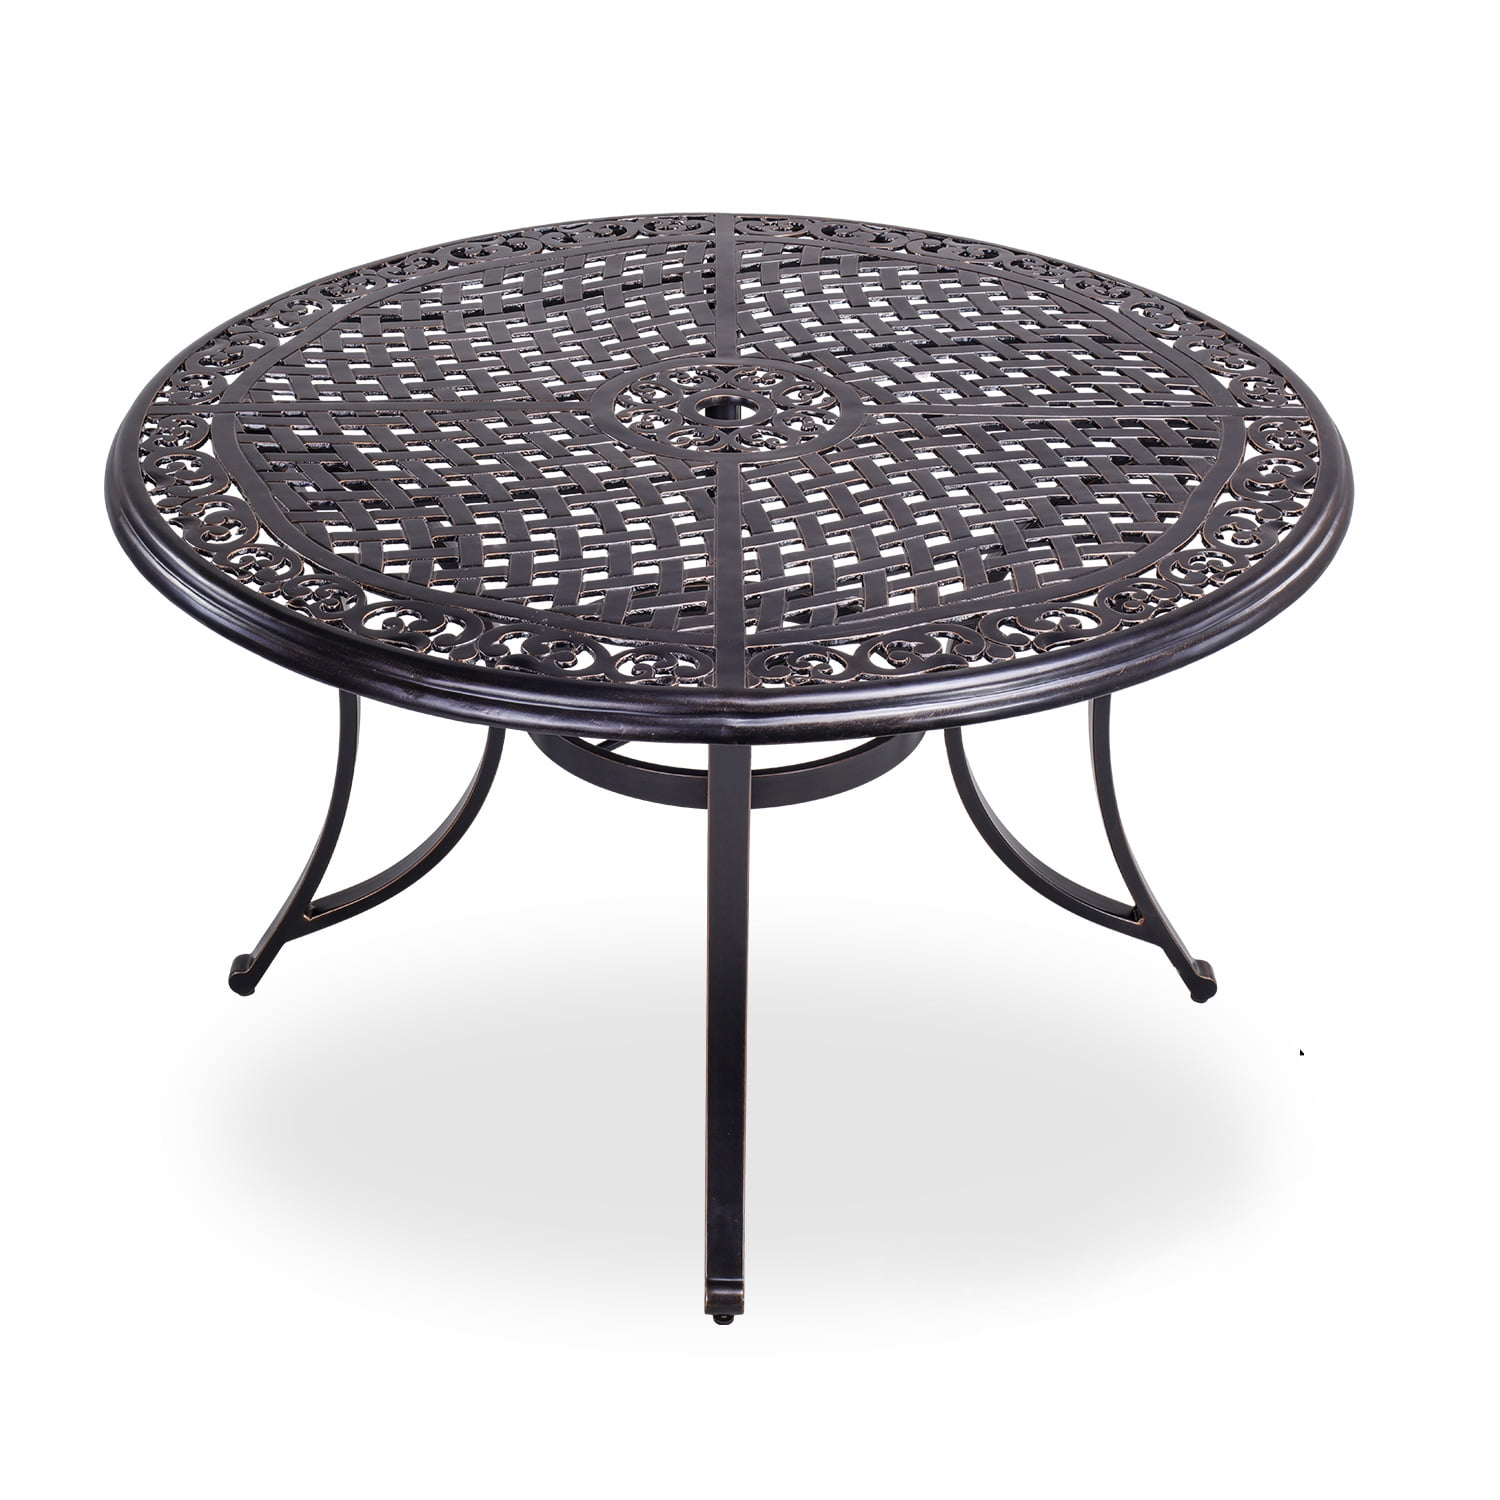 Outdoor Patio Table With Umbrella Hole